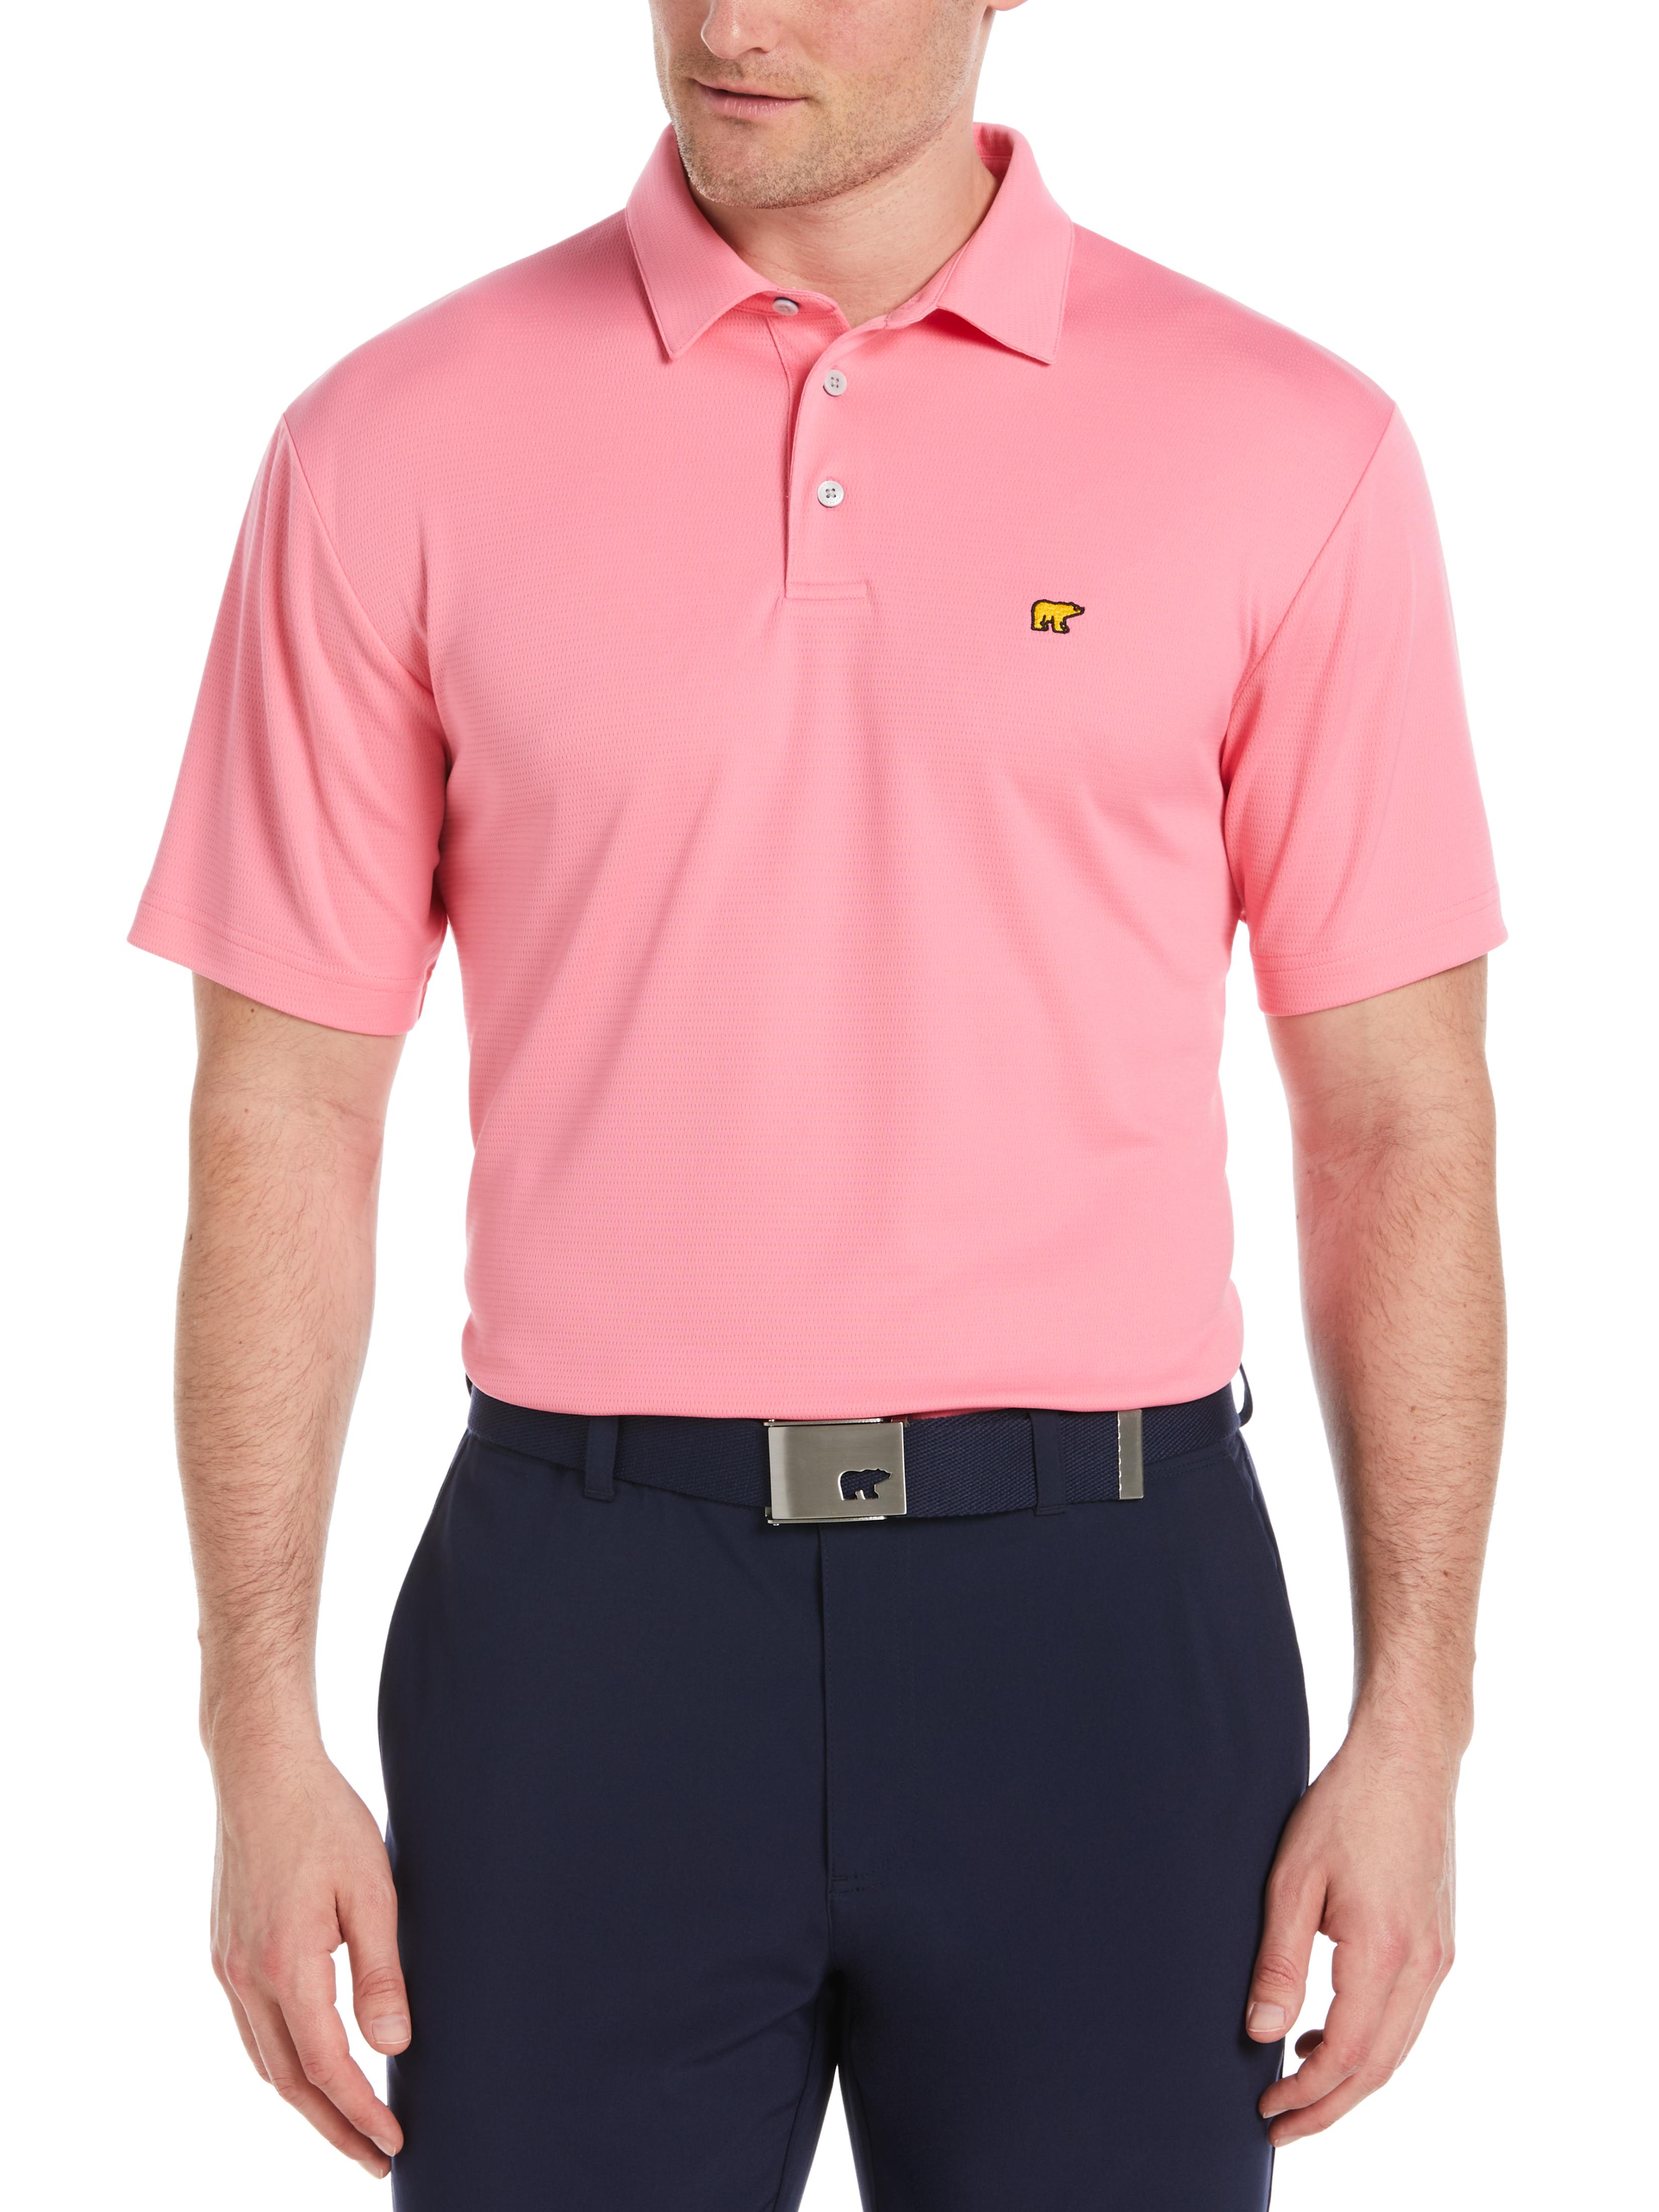 Jack Nicklaus Mens Solid Textured Golf Polo Shirt, Size 2XL, Flowering Ginger Pink, 100% Polyester | Golf Apparel Shop